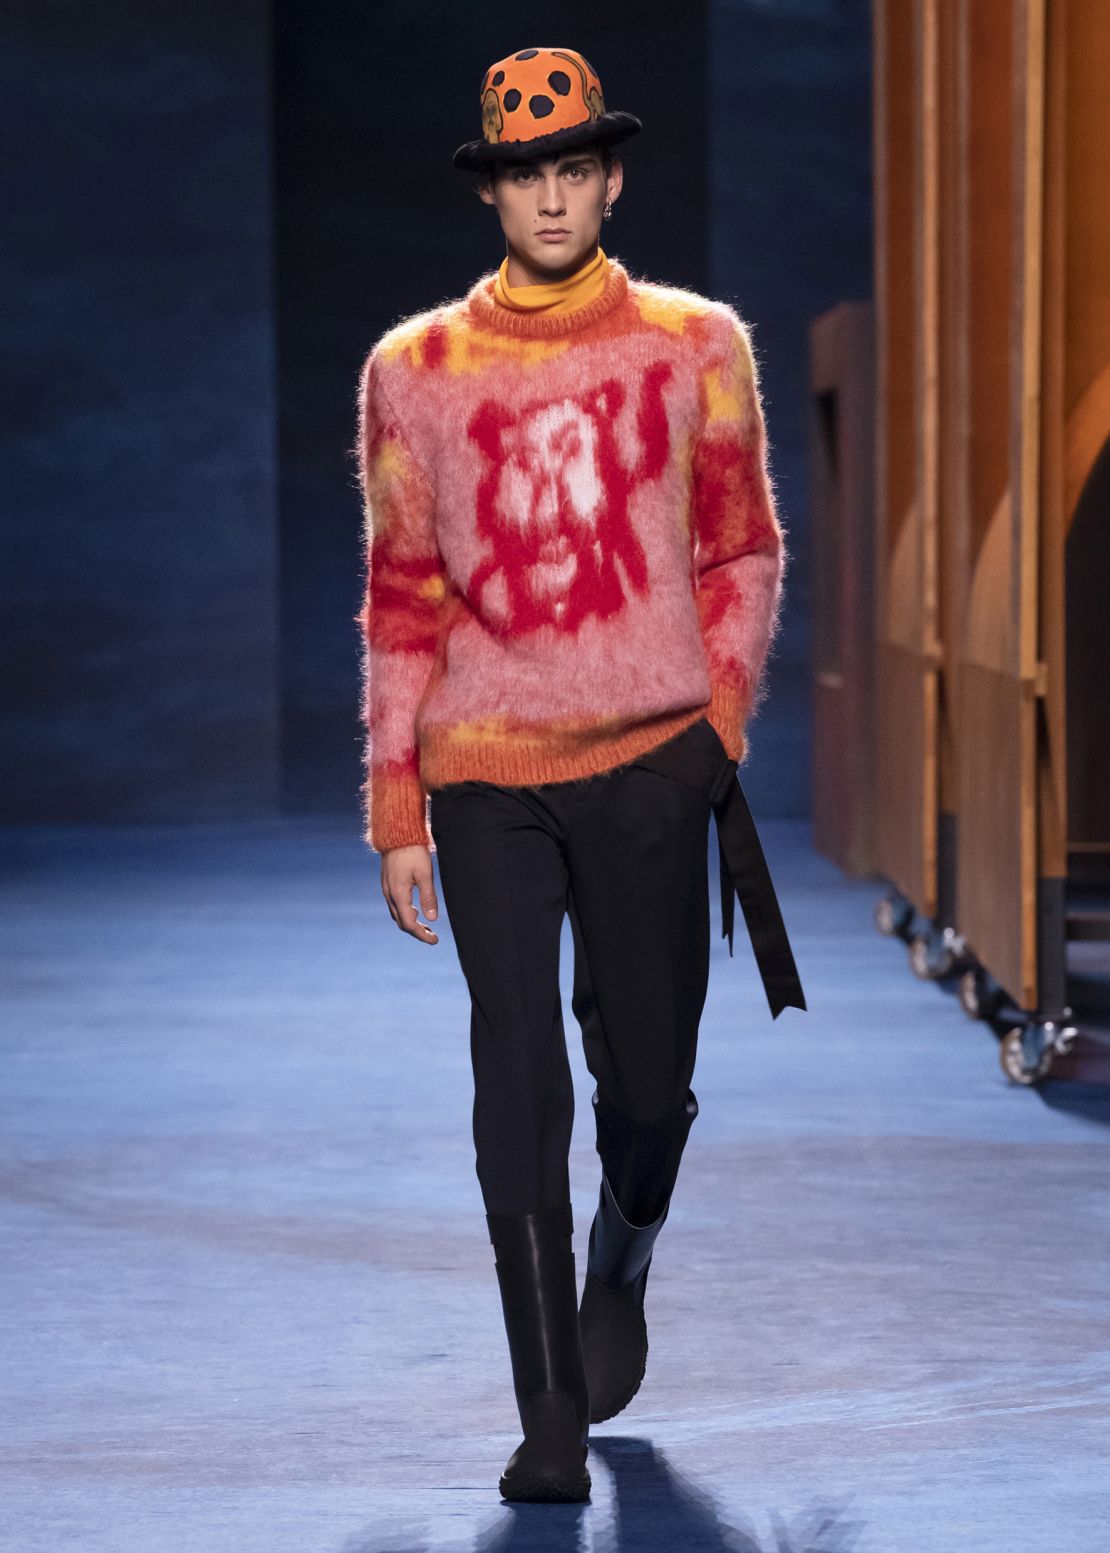 At Dior, Kim Jones collaborated with Scottish-born painted Peter Doig on his latest menswear collection.